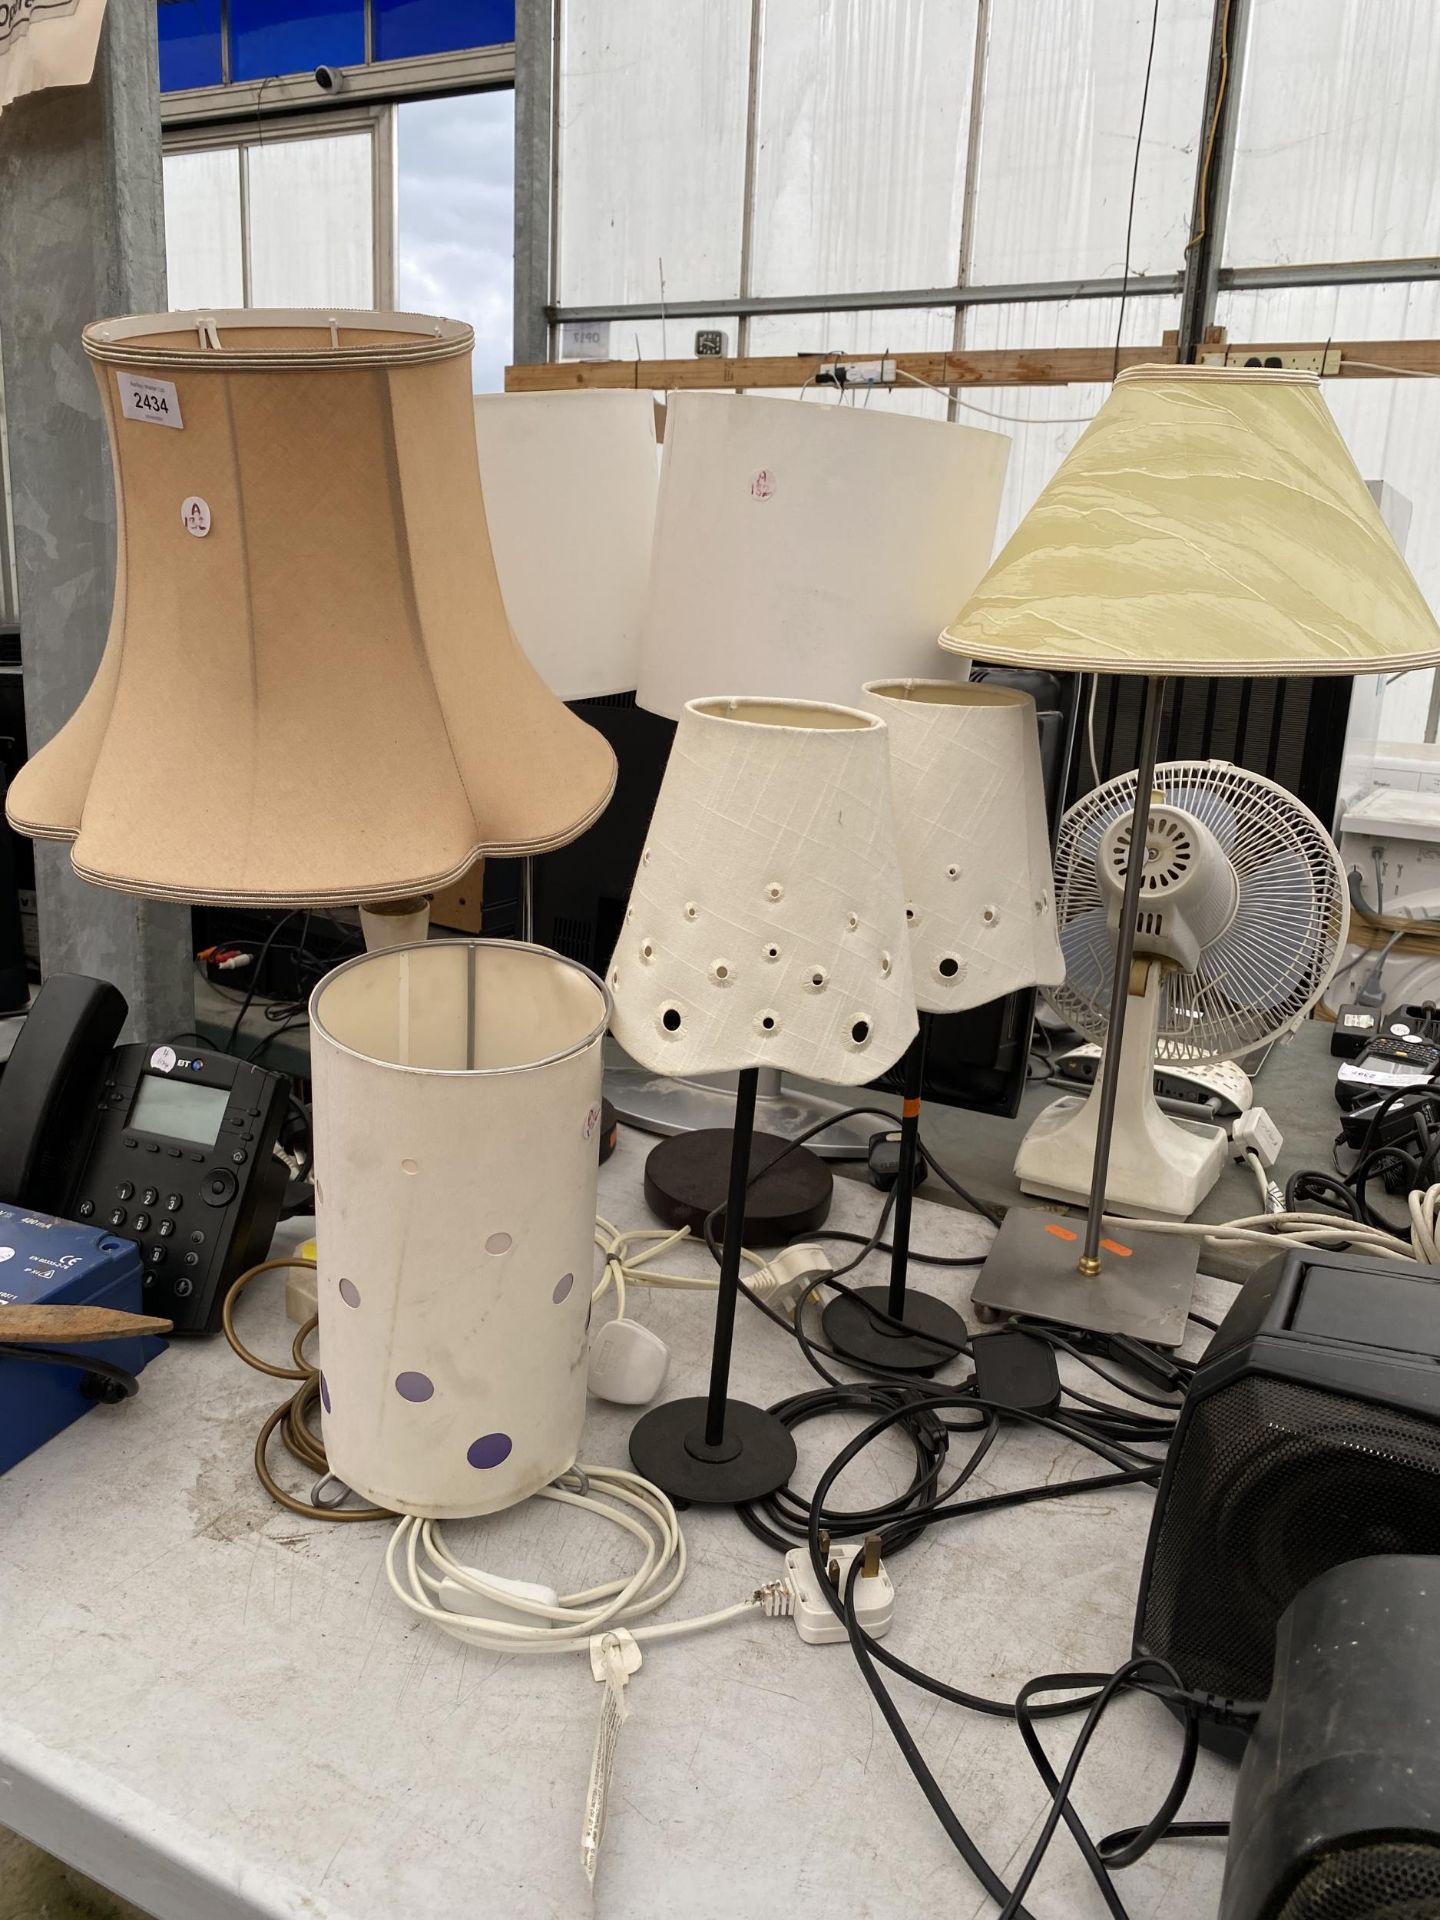 AN ASSORTMENT OF TABLE LAMPS